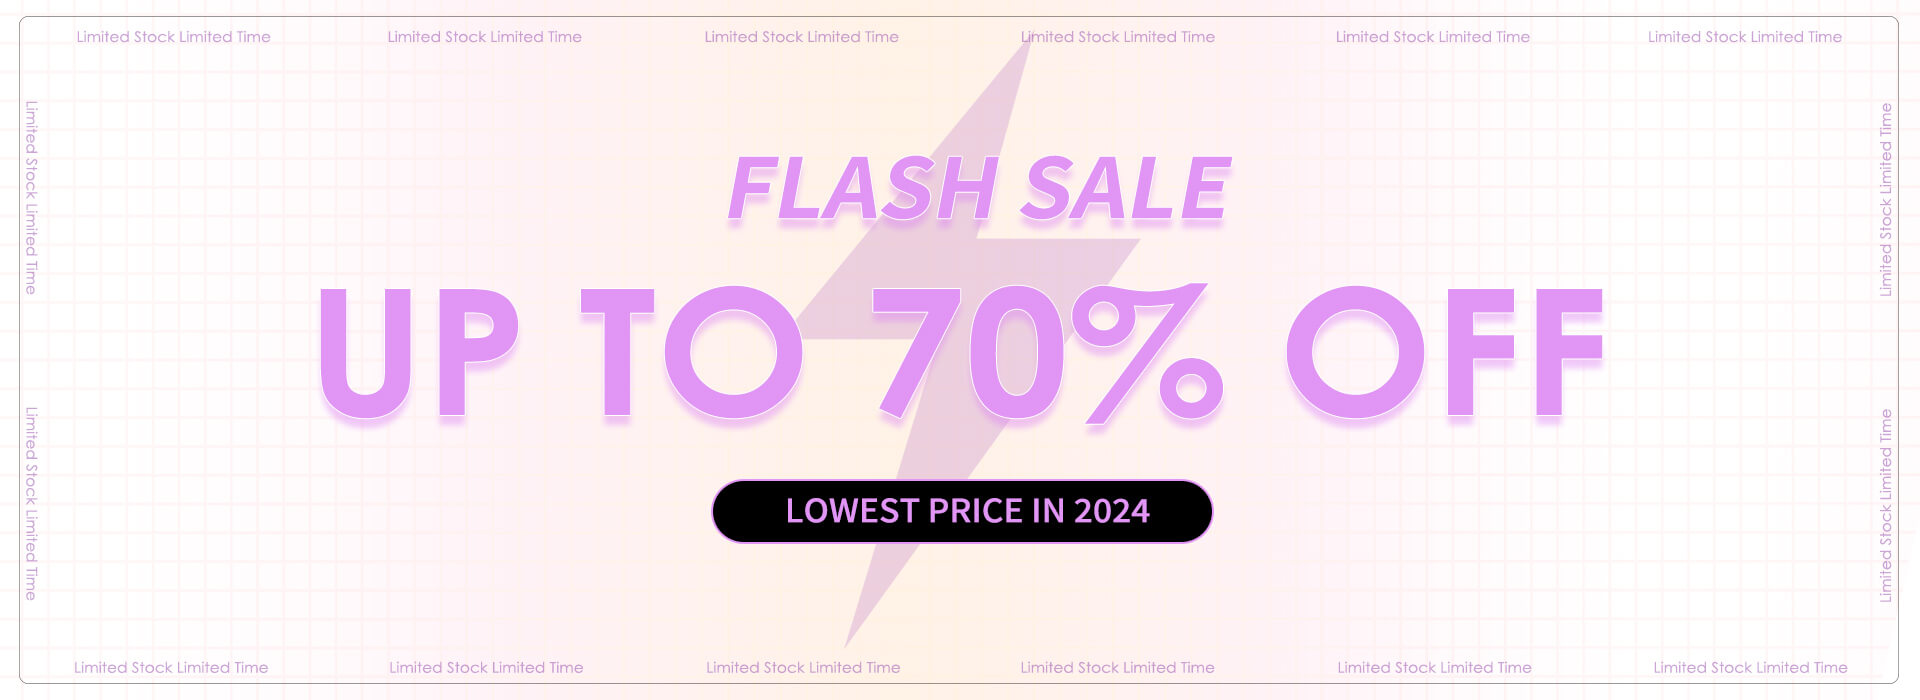 flash sale 70% off limited time (1)